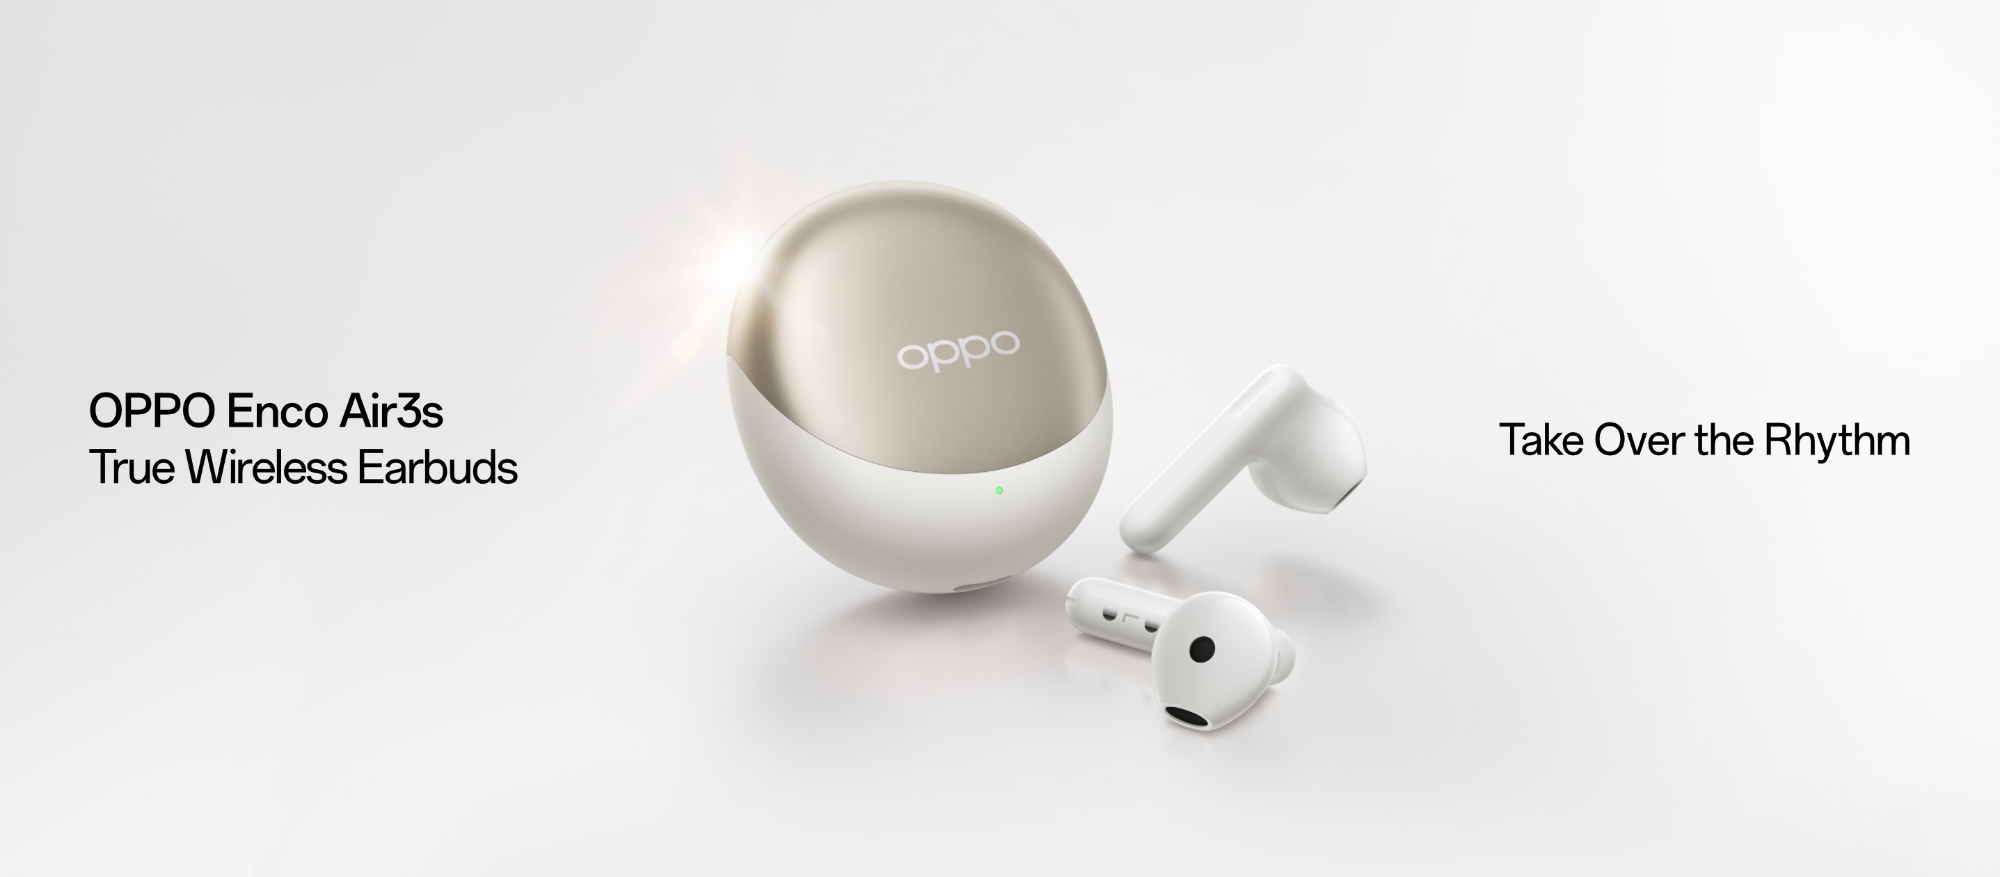 Experience Music All Around with the OPPO Enco Air3 True Wireless Earbuds -  ClickTheCity